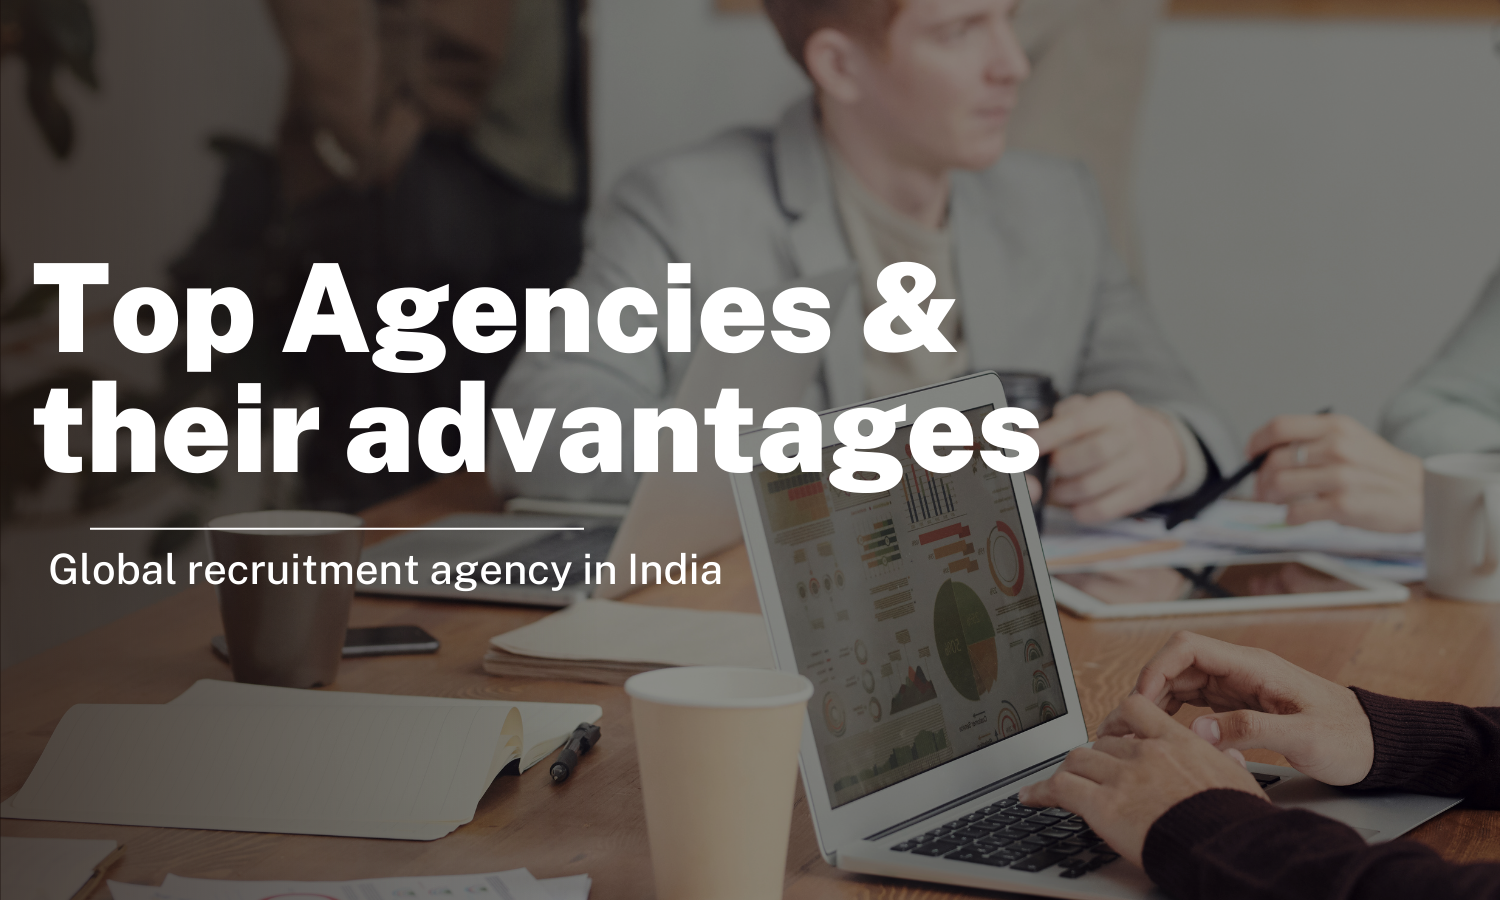 Global recruitment agency in India